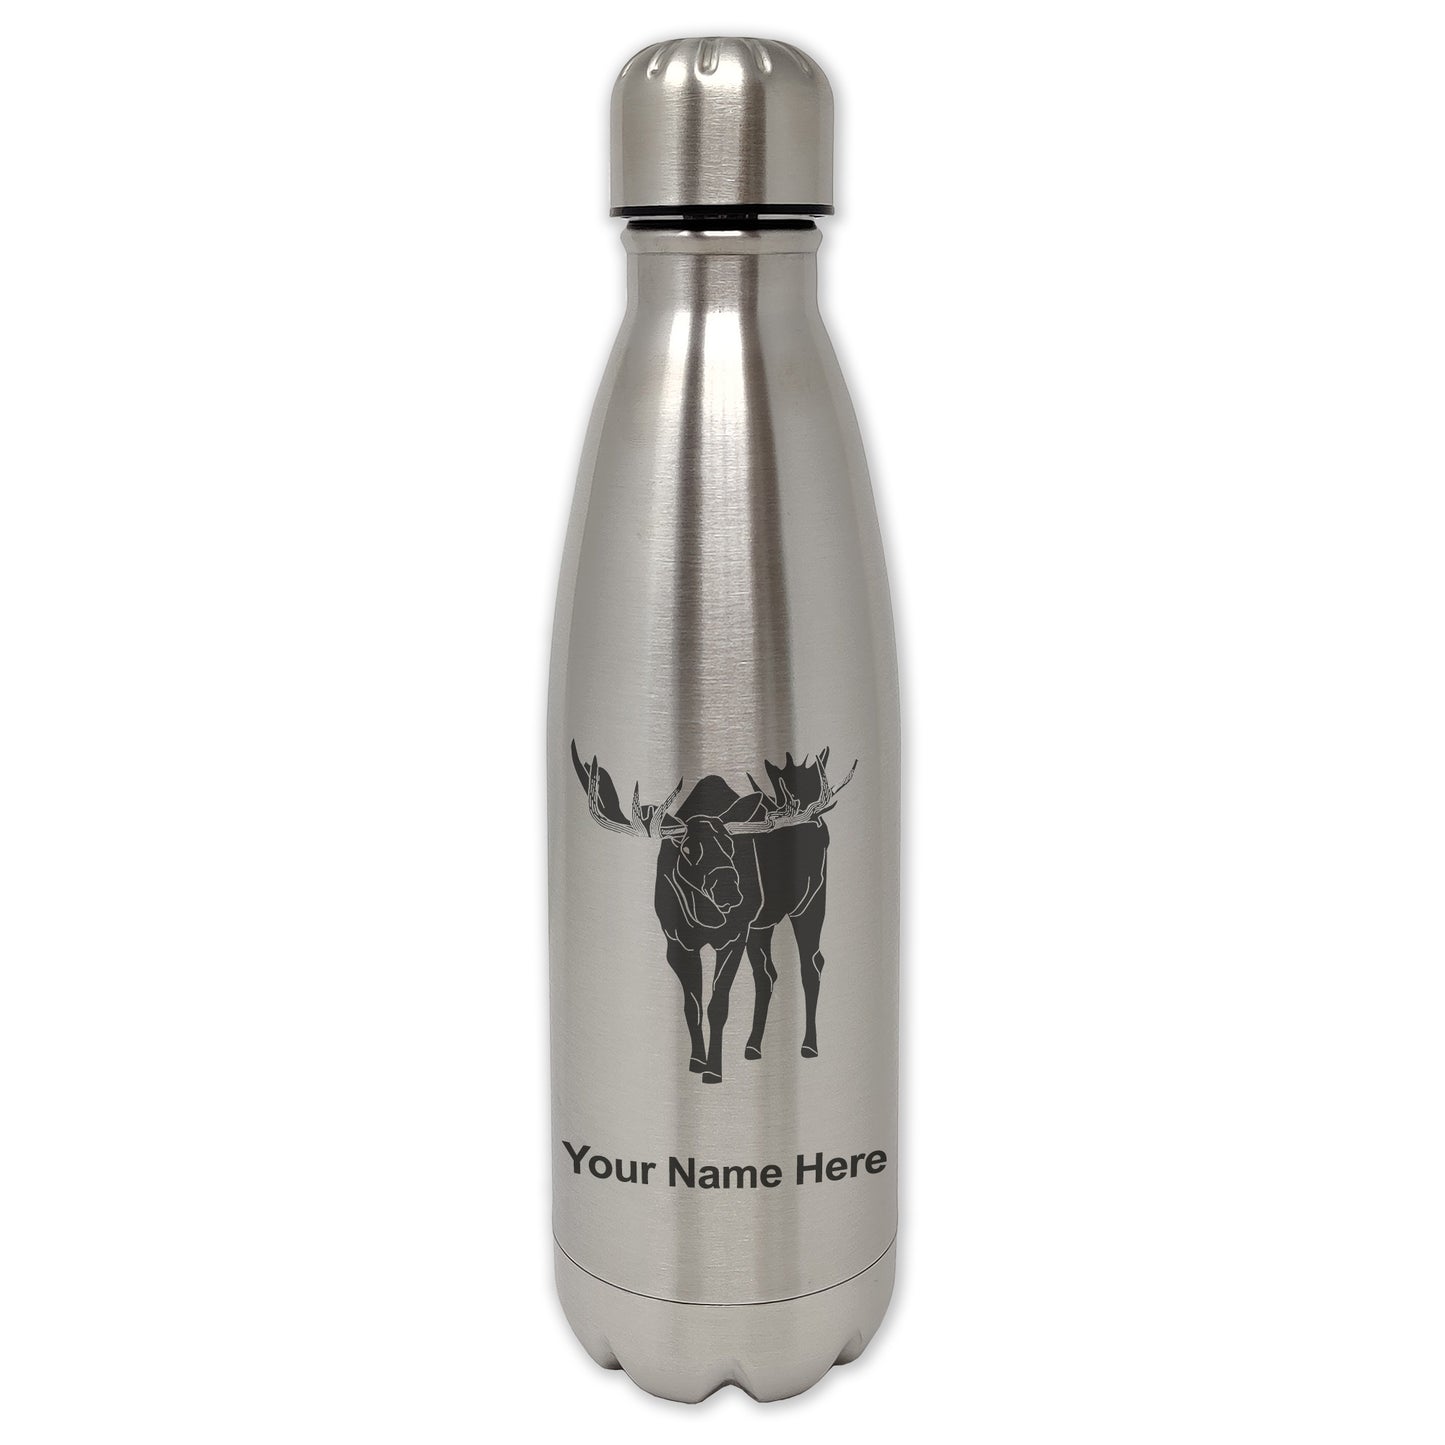 LaserGram Single Wall Water Bottle, Moose, Personalized Engraving Included